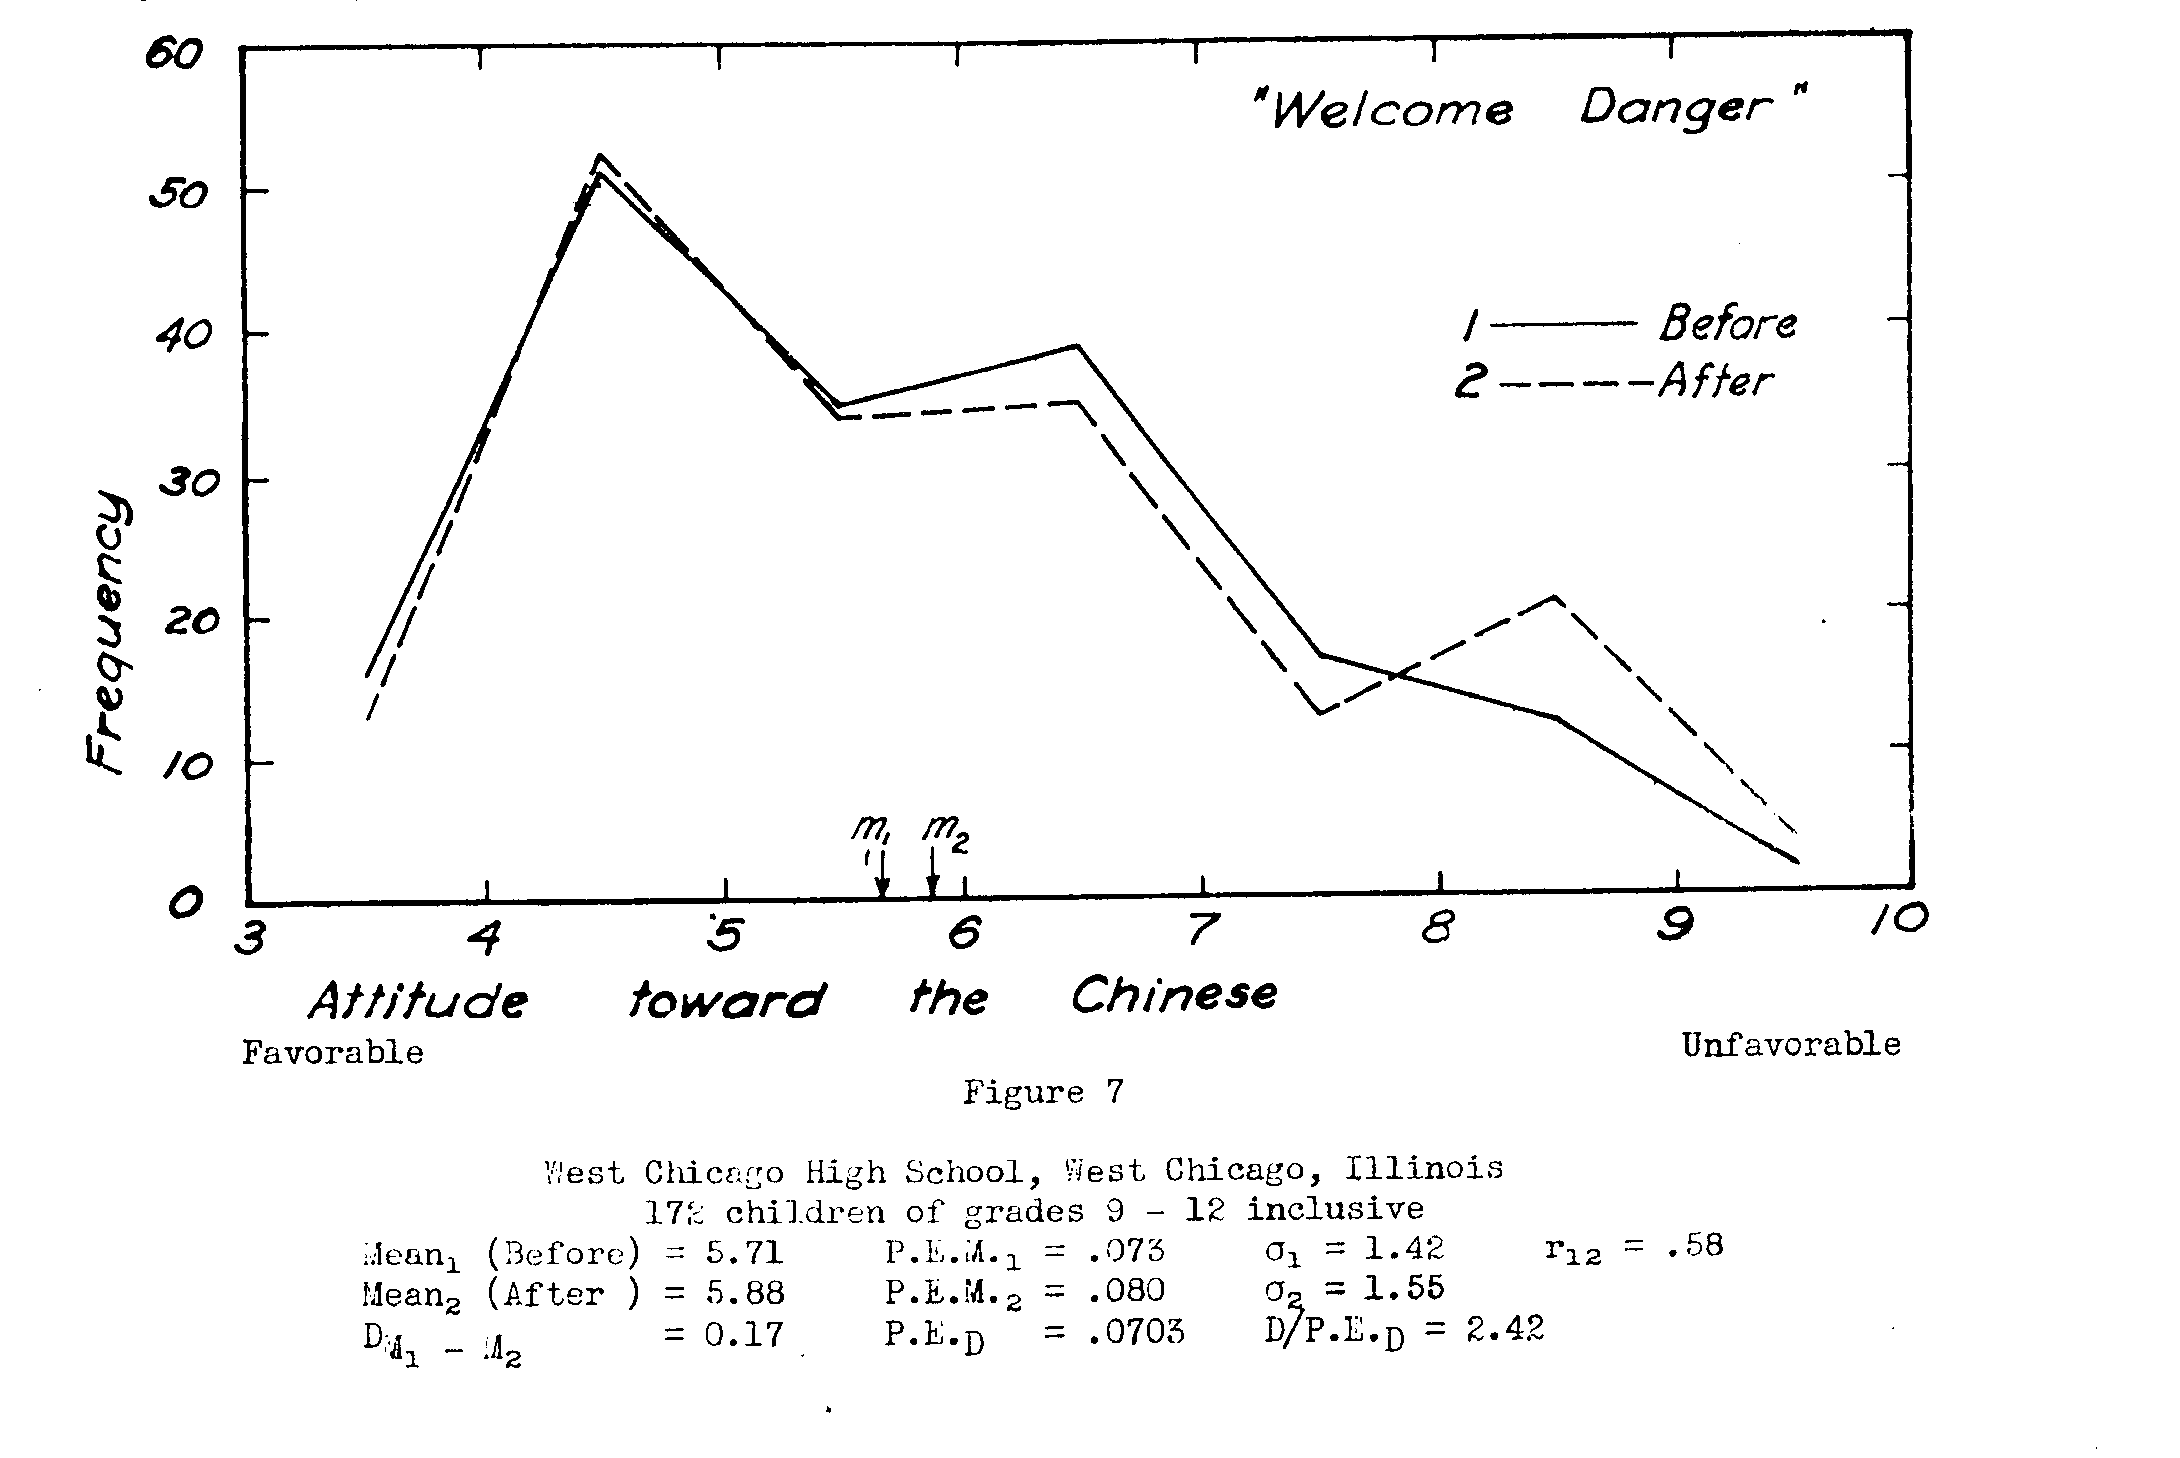 Figure 7, attitude toward Chinese, before and after WELCOME DANGER